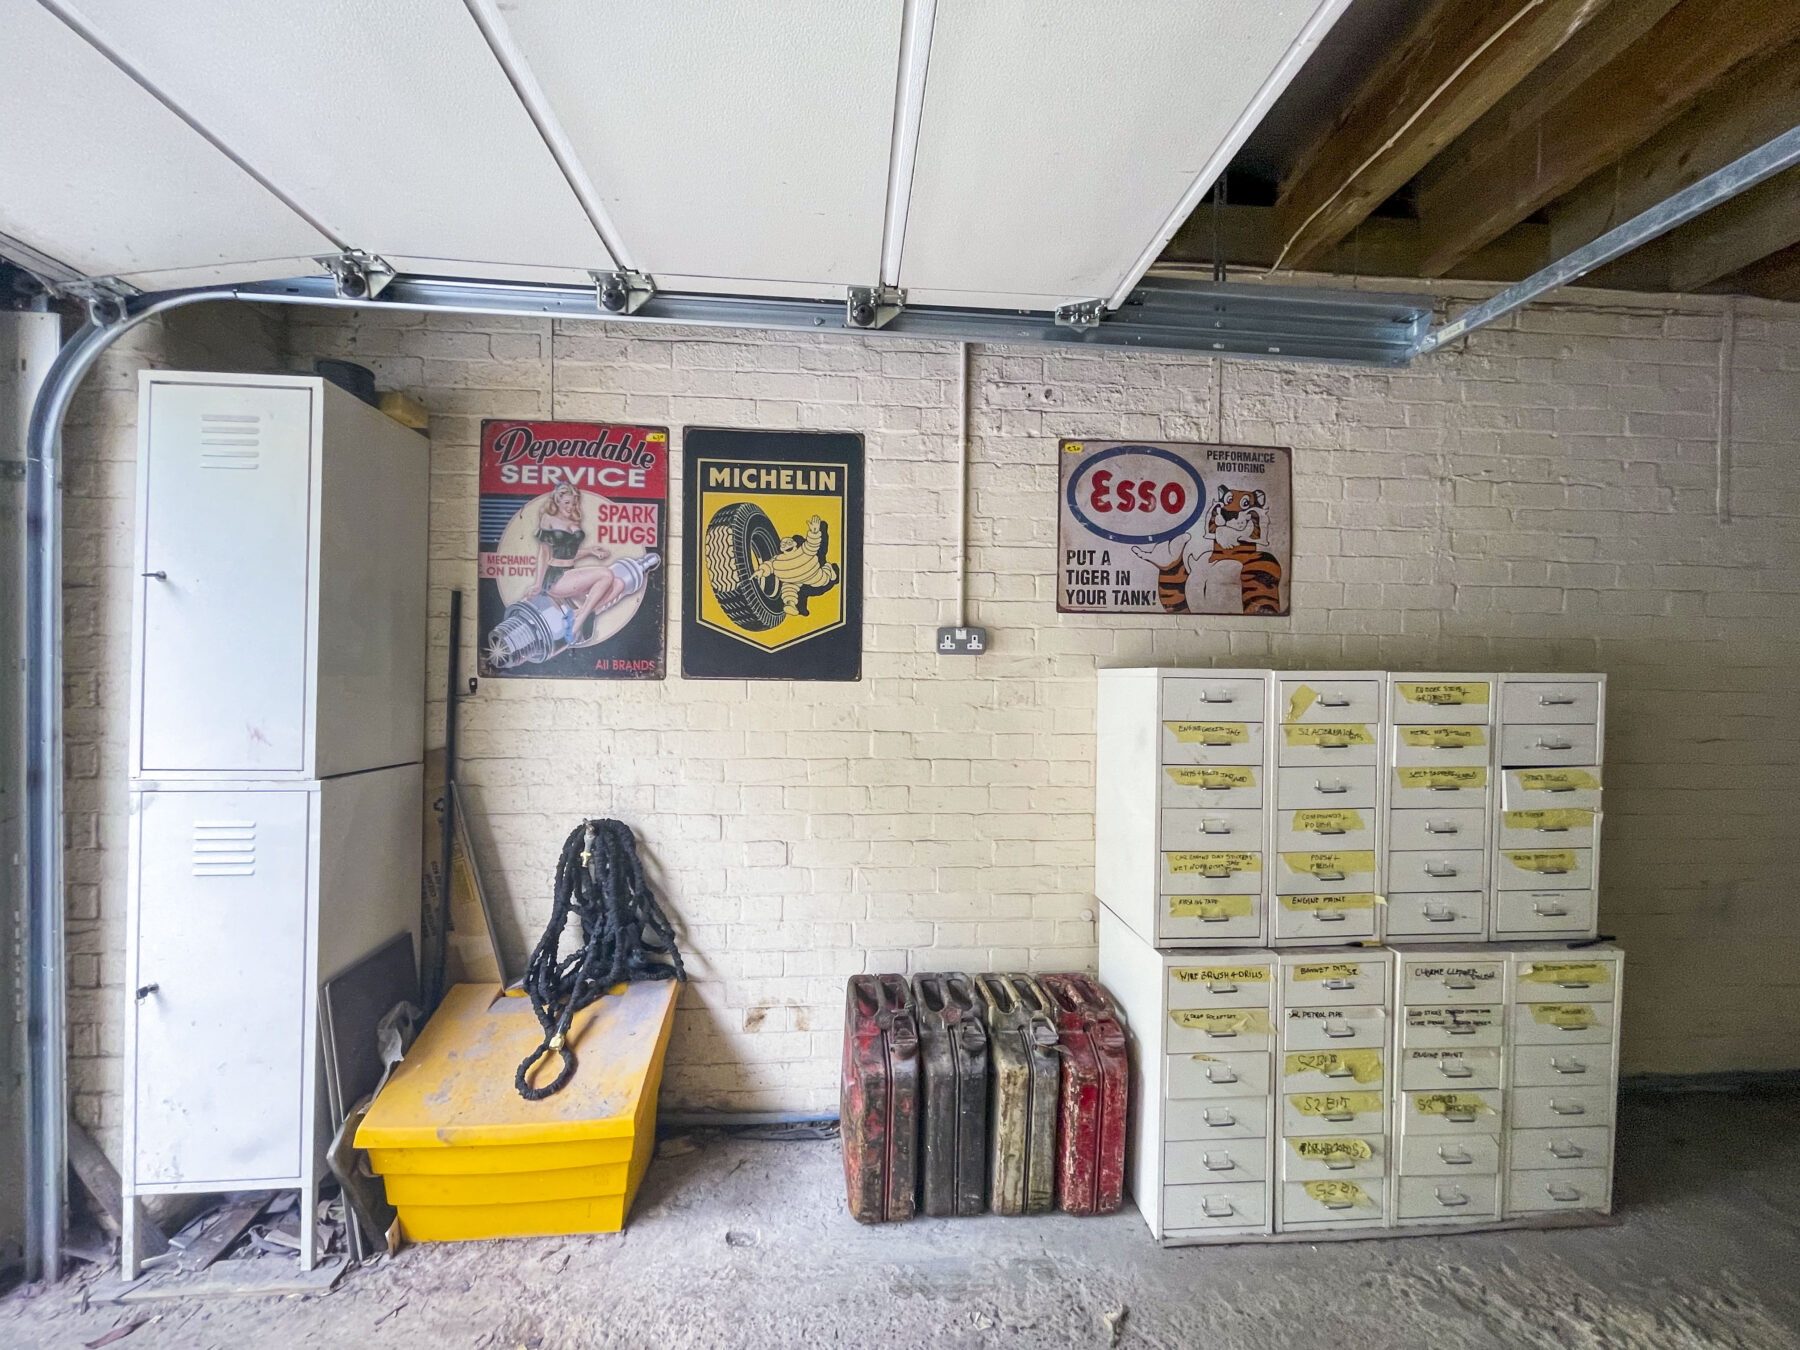 Garage spacious storage stone wall posters TV filming location hire lodge London 93